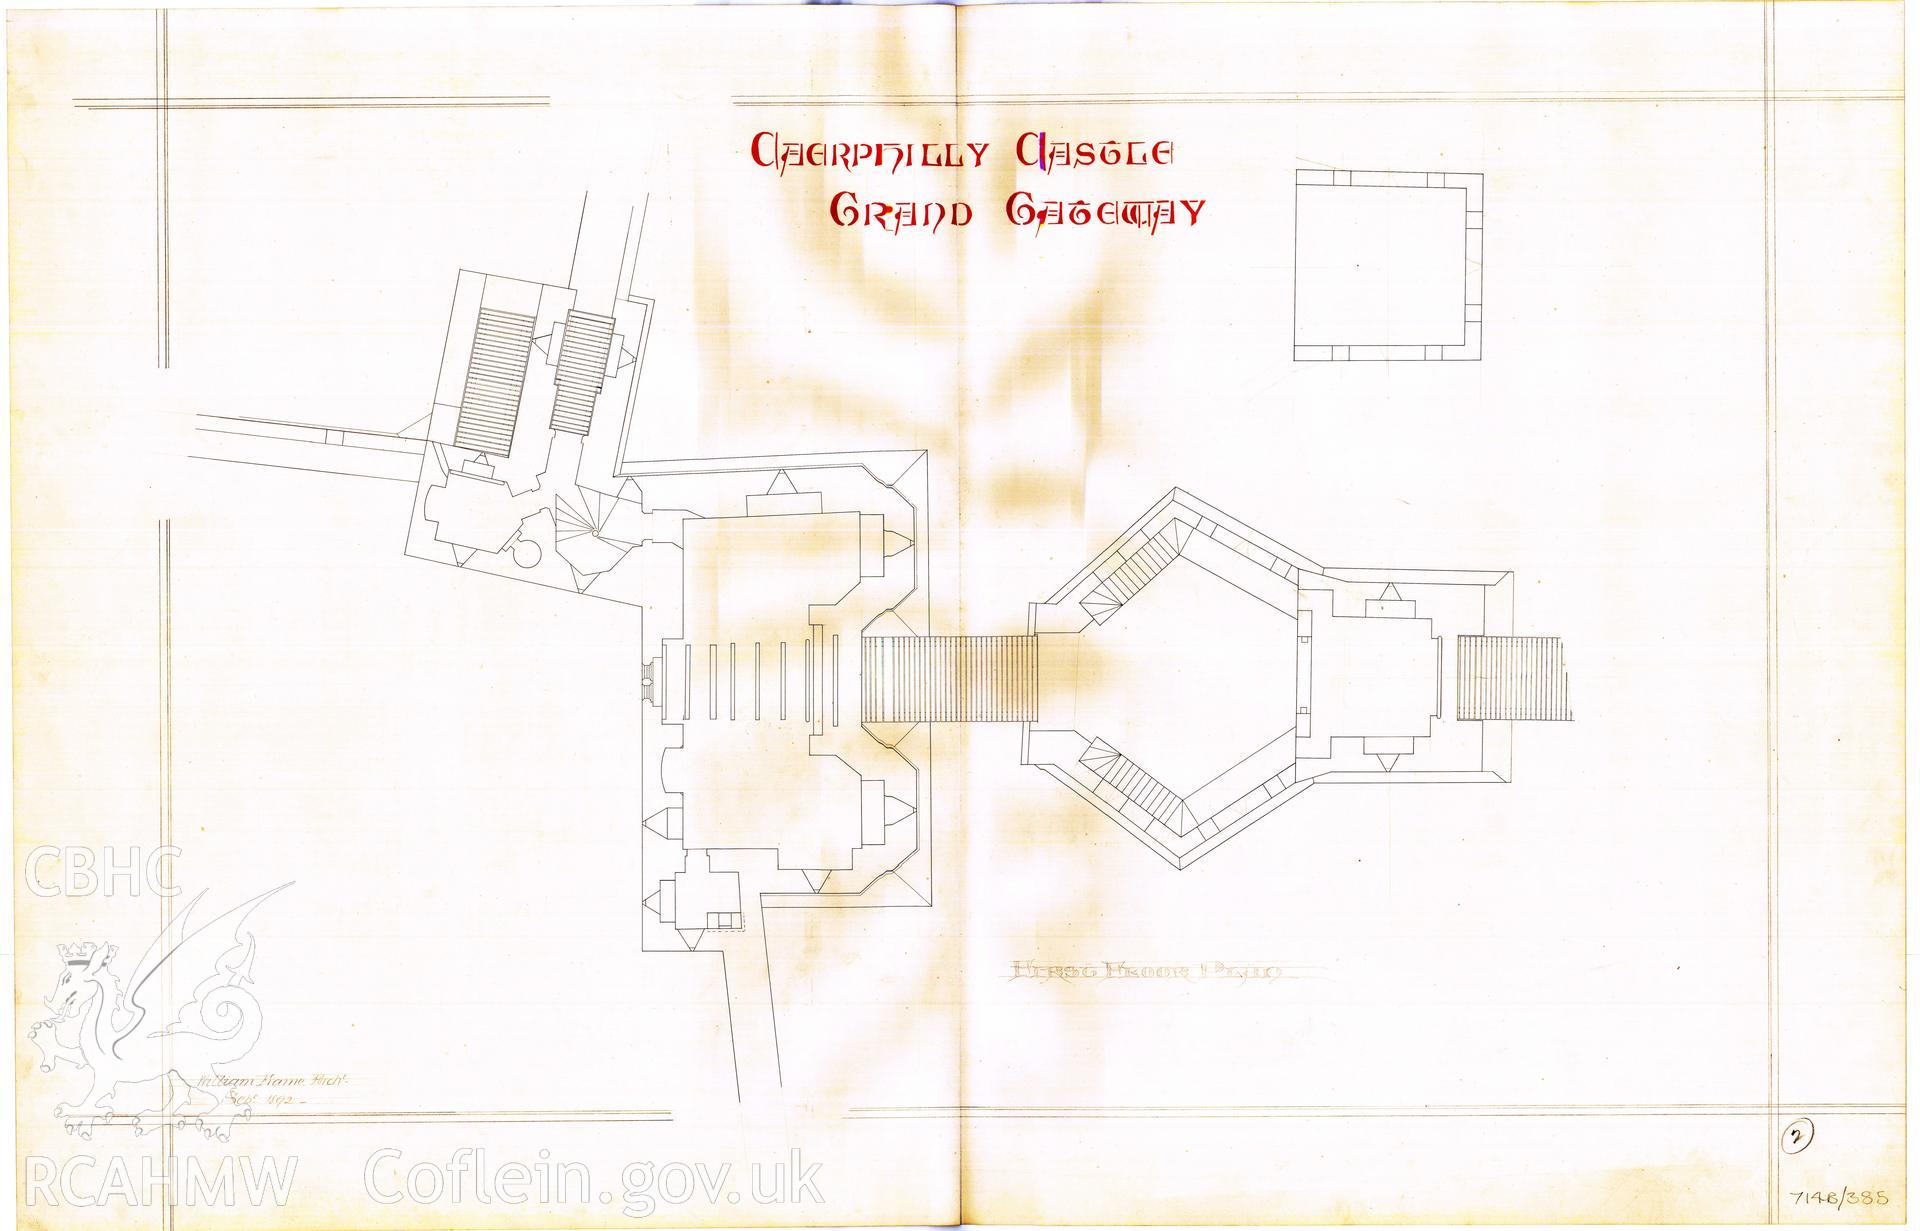 Cadw guardianship monument drawing of Caerphilly Castle. Grand Gateway 1st Floor Plan. Cadw Ref. No:714B/385. Scale 1:96.